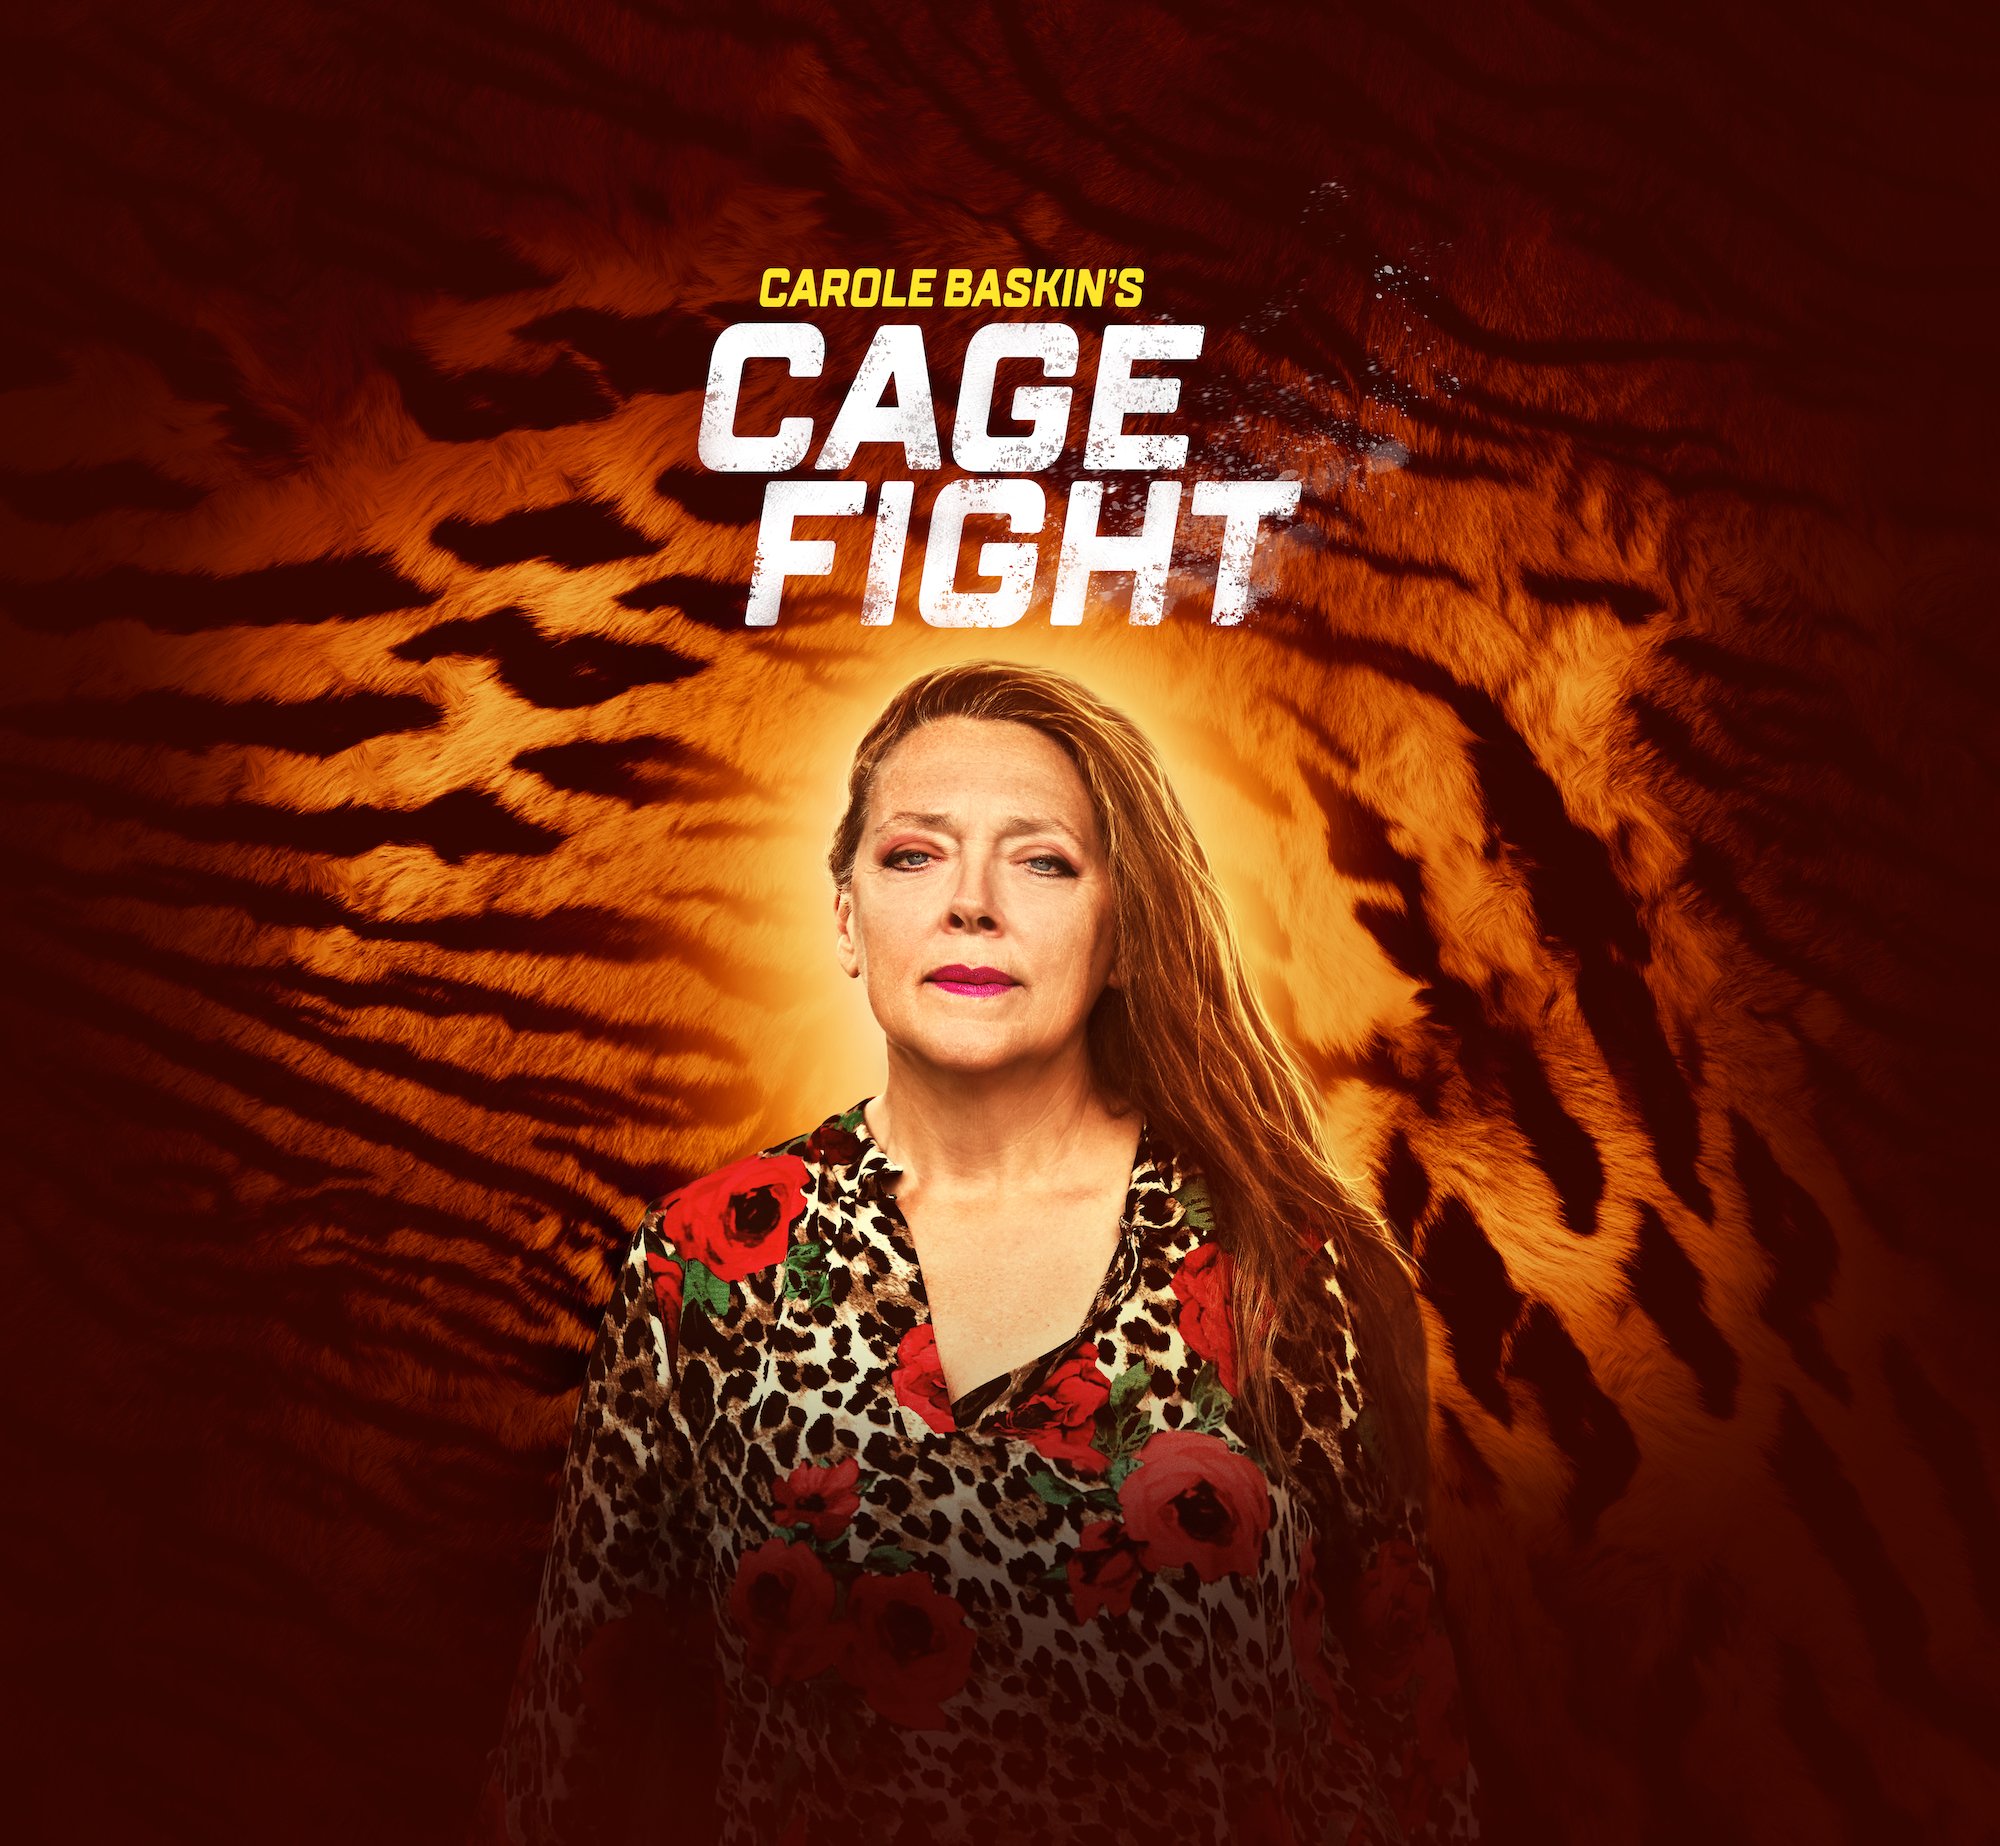 'Carole Baskin's Cage Fight' poster